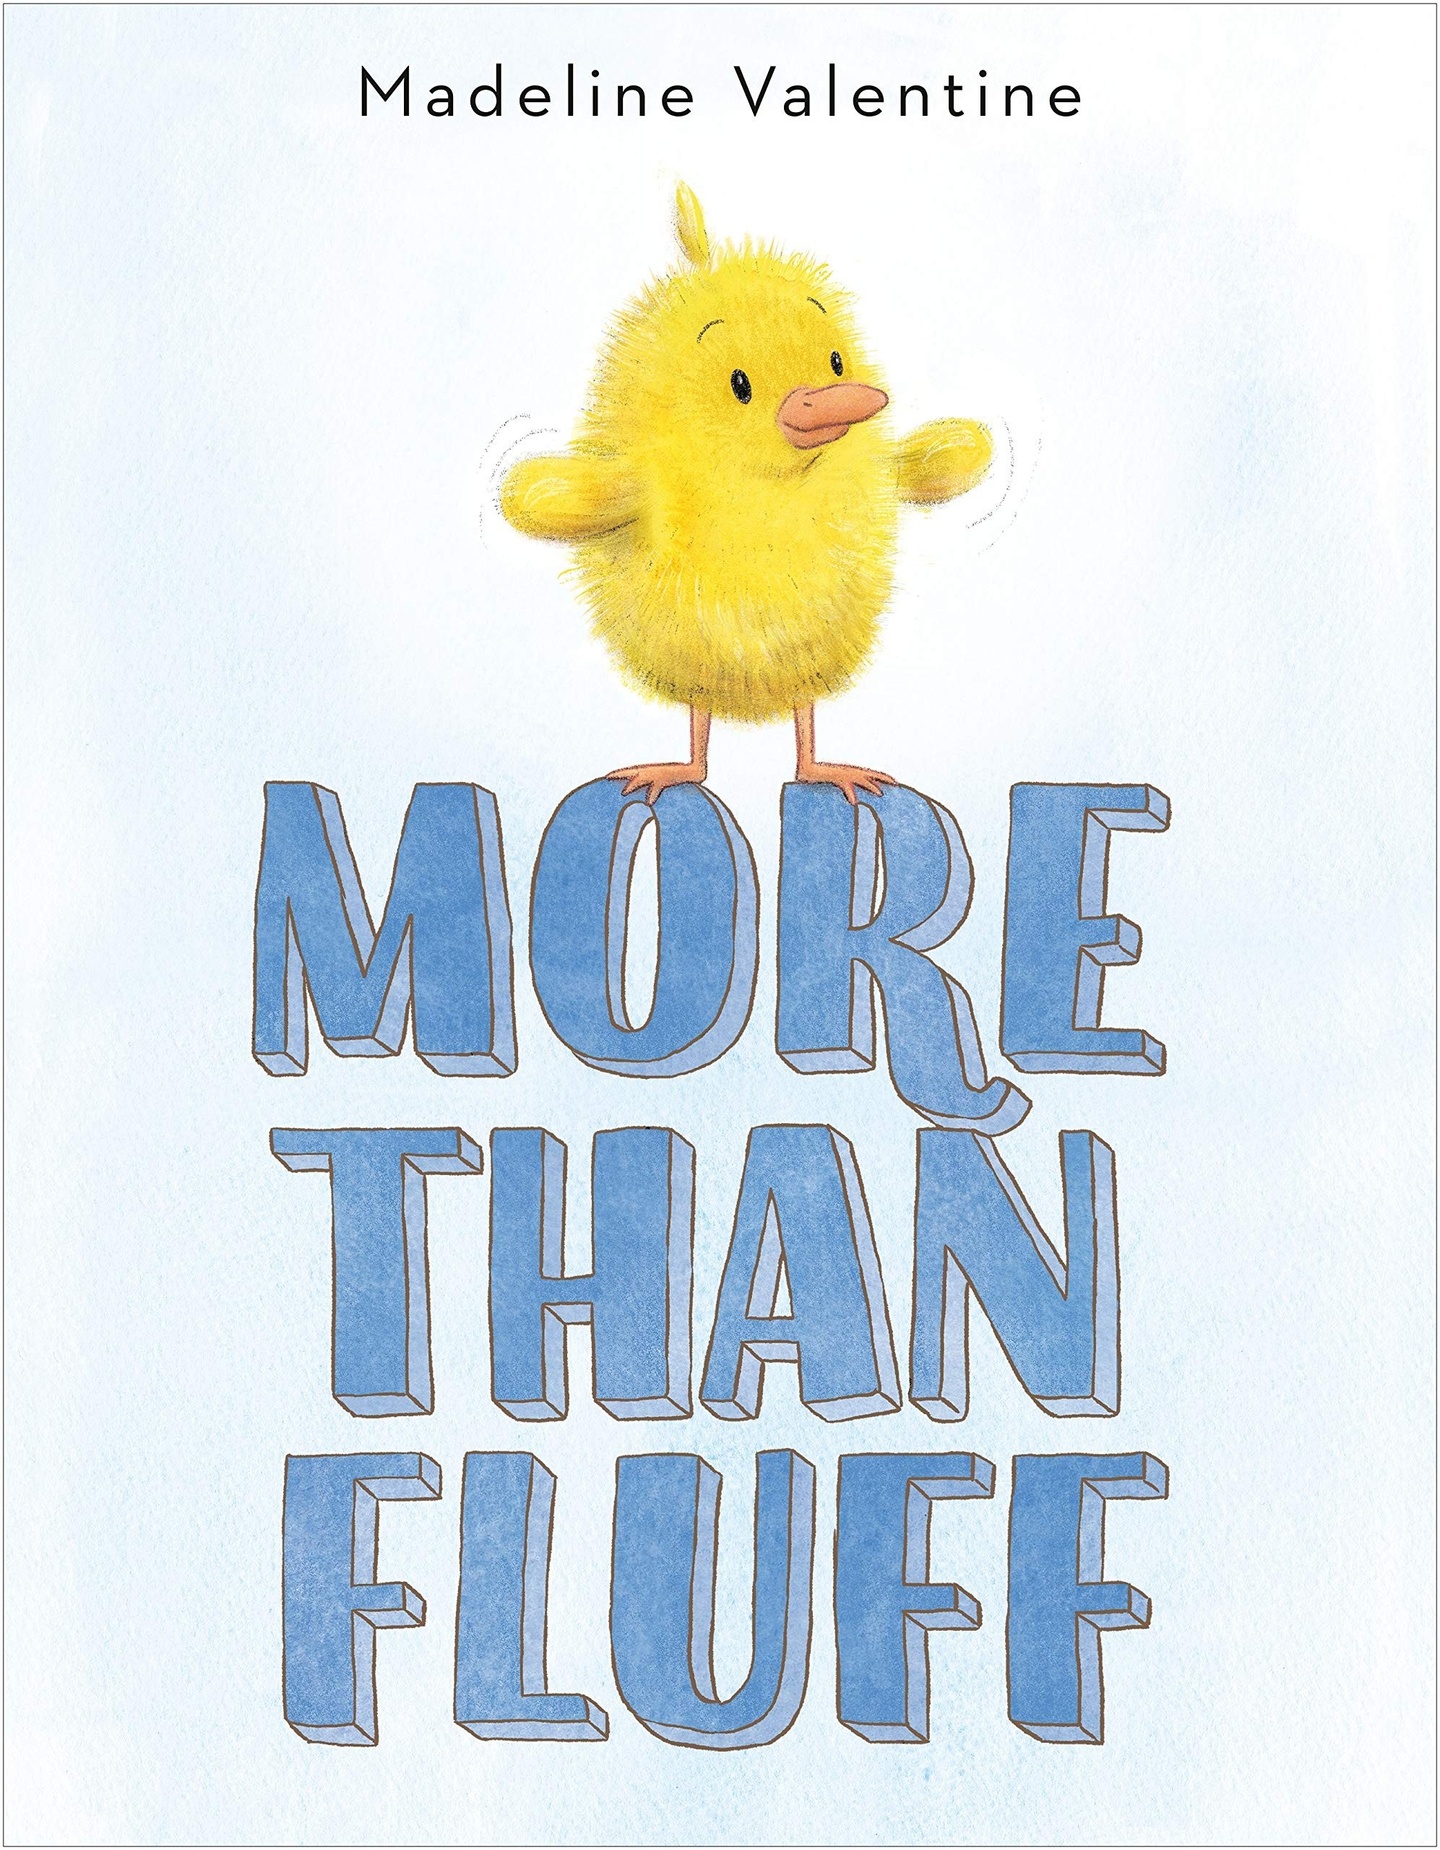 Book cover featuring a fuzzy yellow chick standing on top of 'More Than Fluff' text in blue